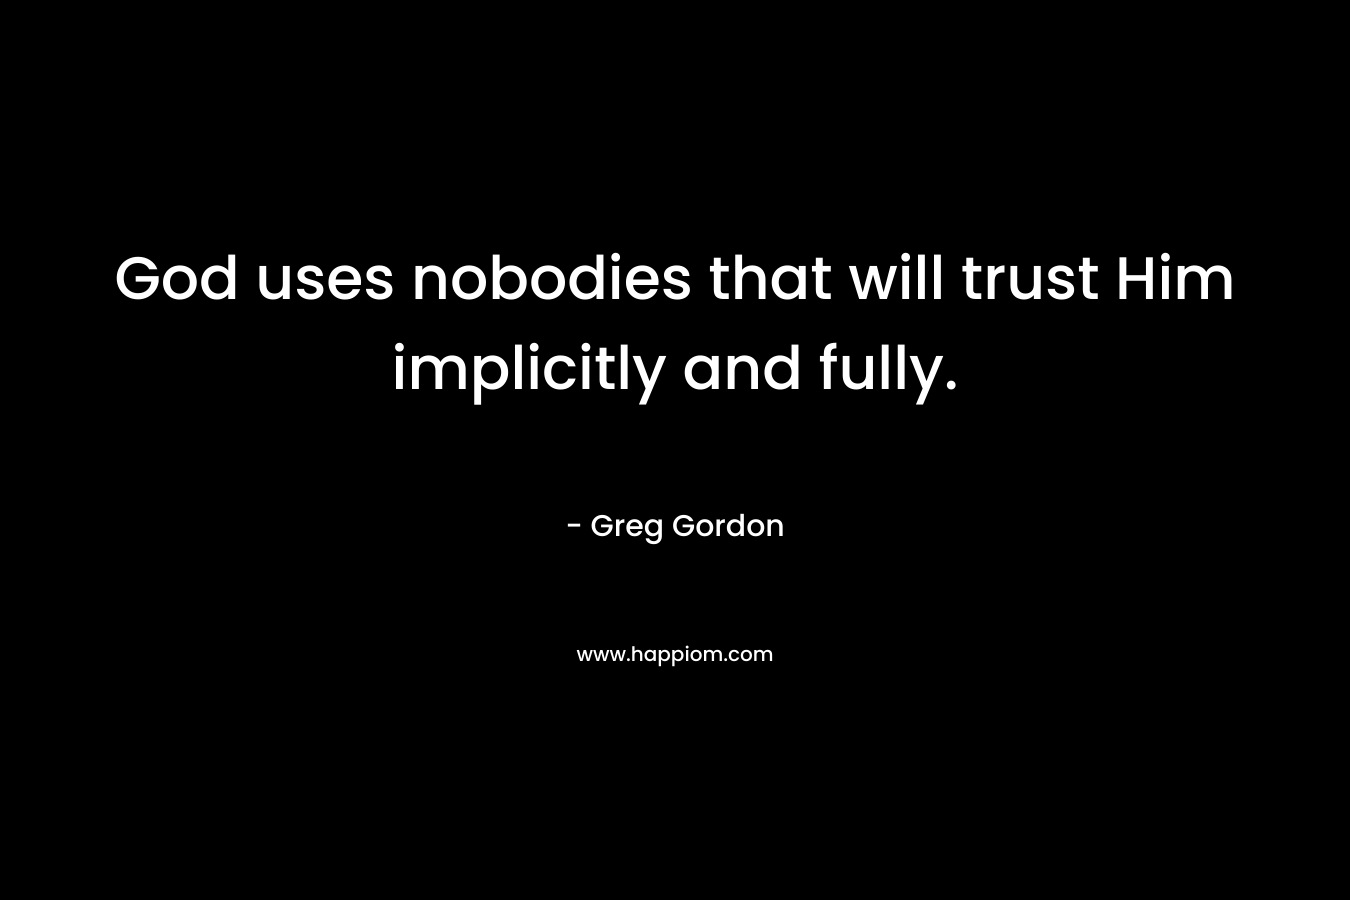 God uses nobodies that will trust Him implicitly and fully.